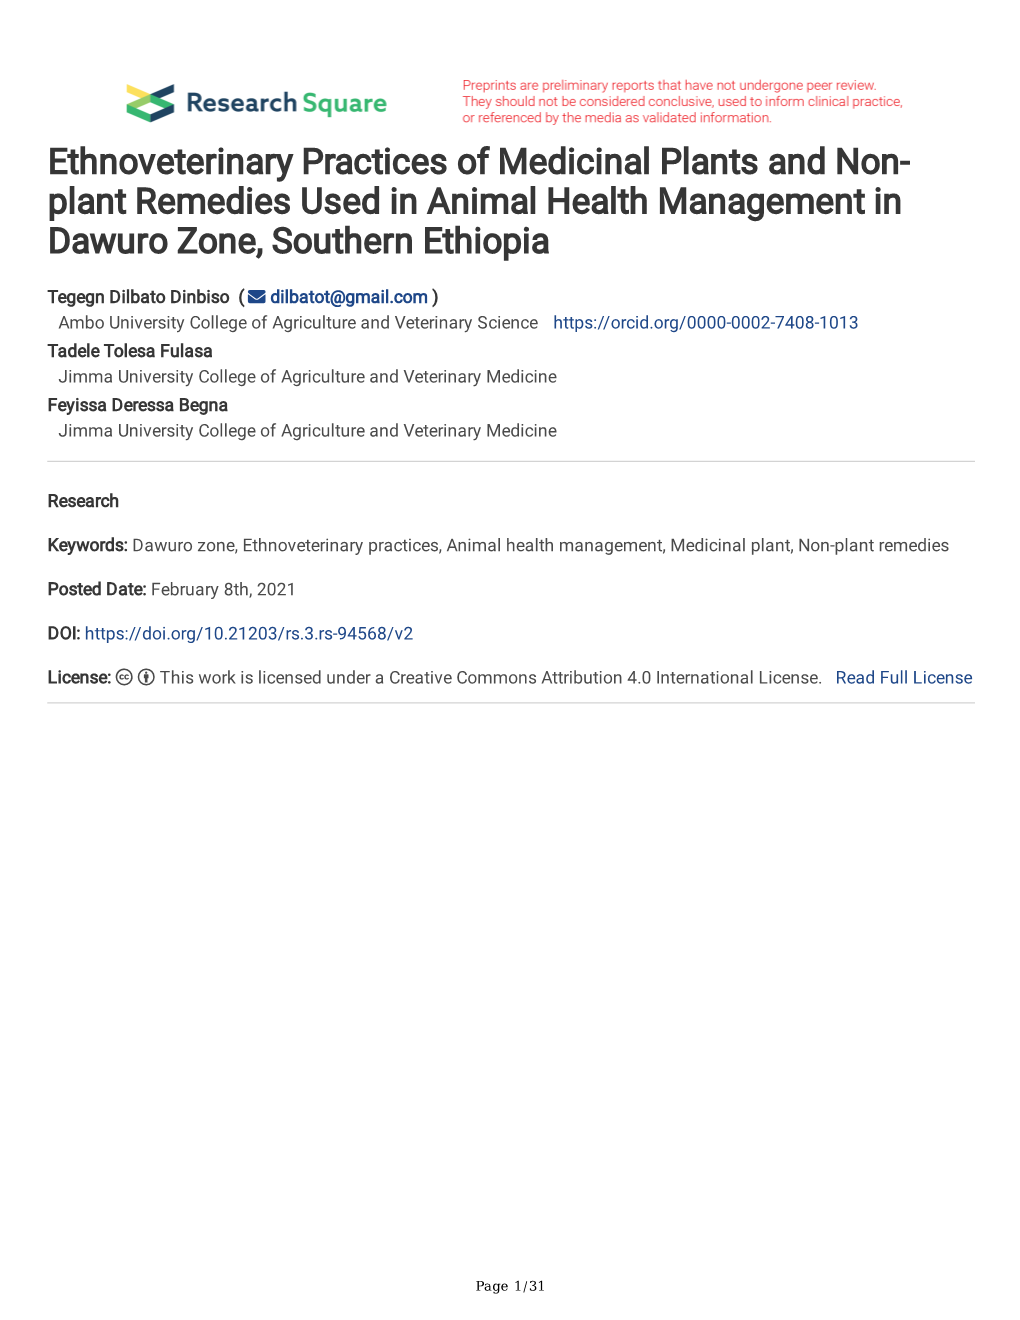 Ethnoveterinary Practices of Medicinal Plants and Non- Plant Remedies Used in Animal Health Management in Dawuro Zone, Southern Ethiopia